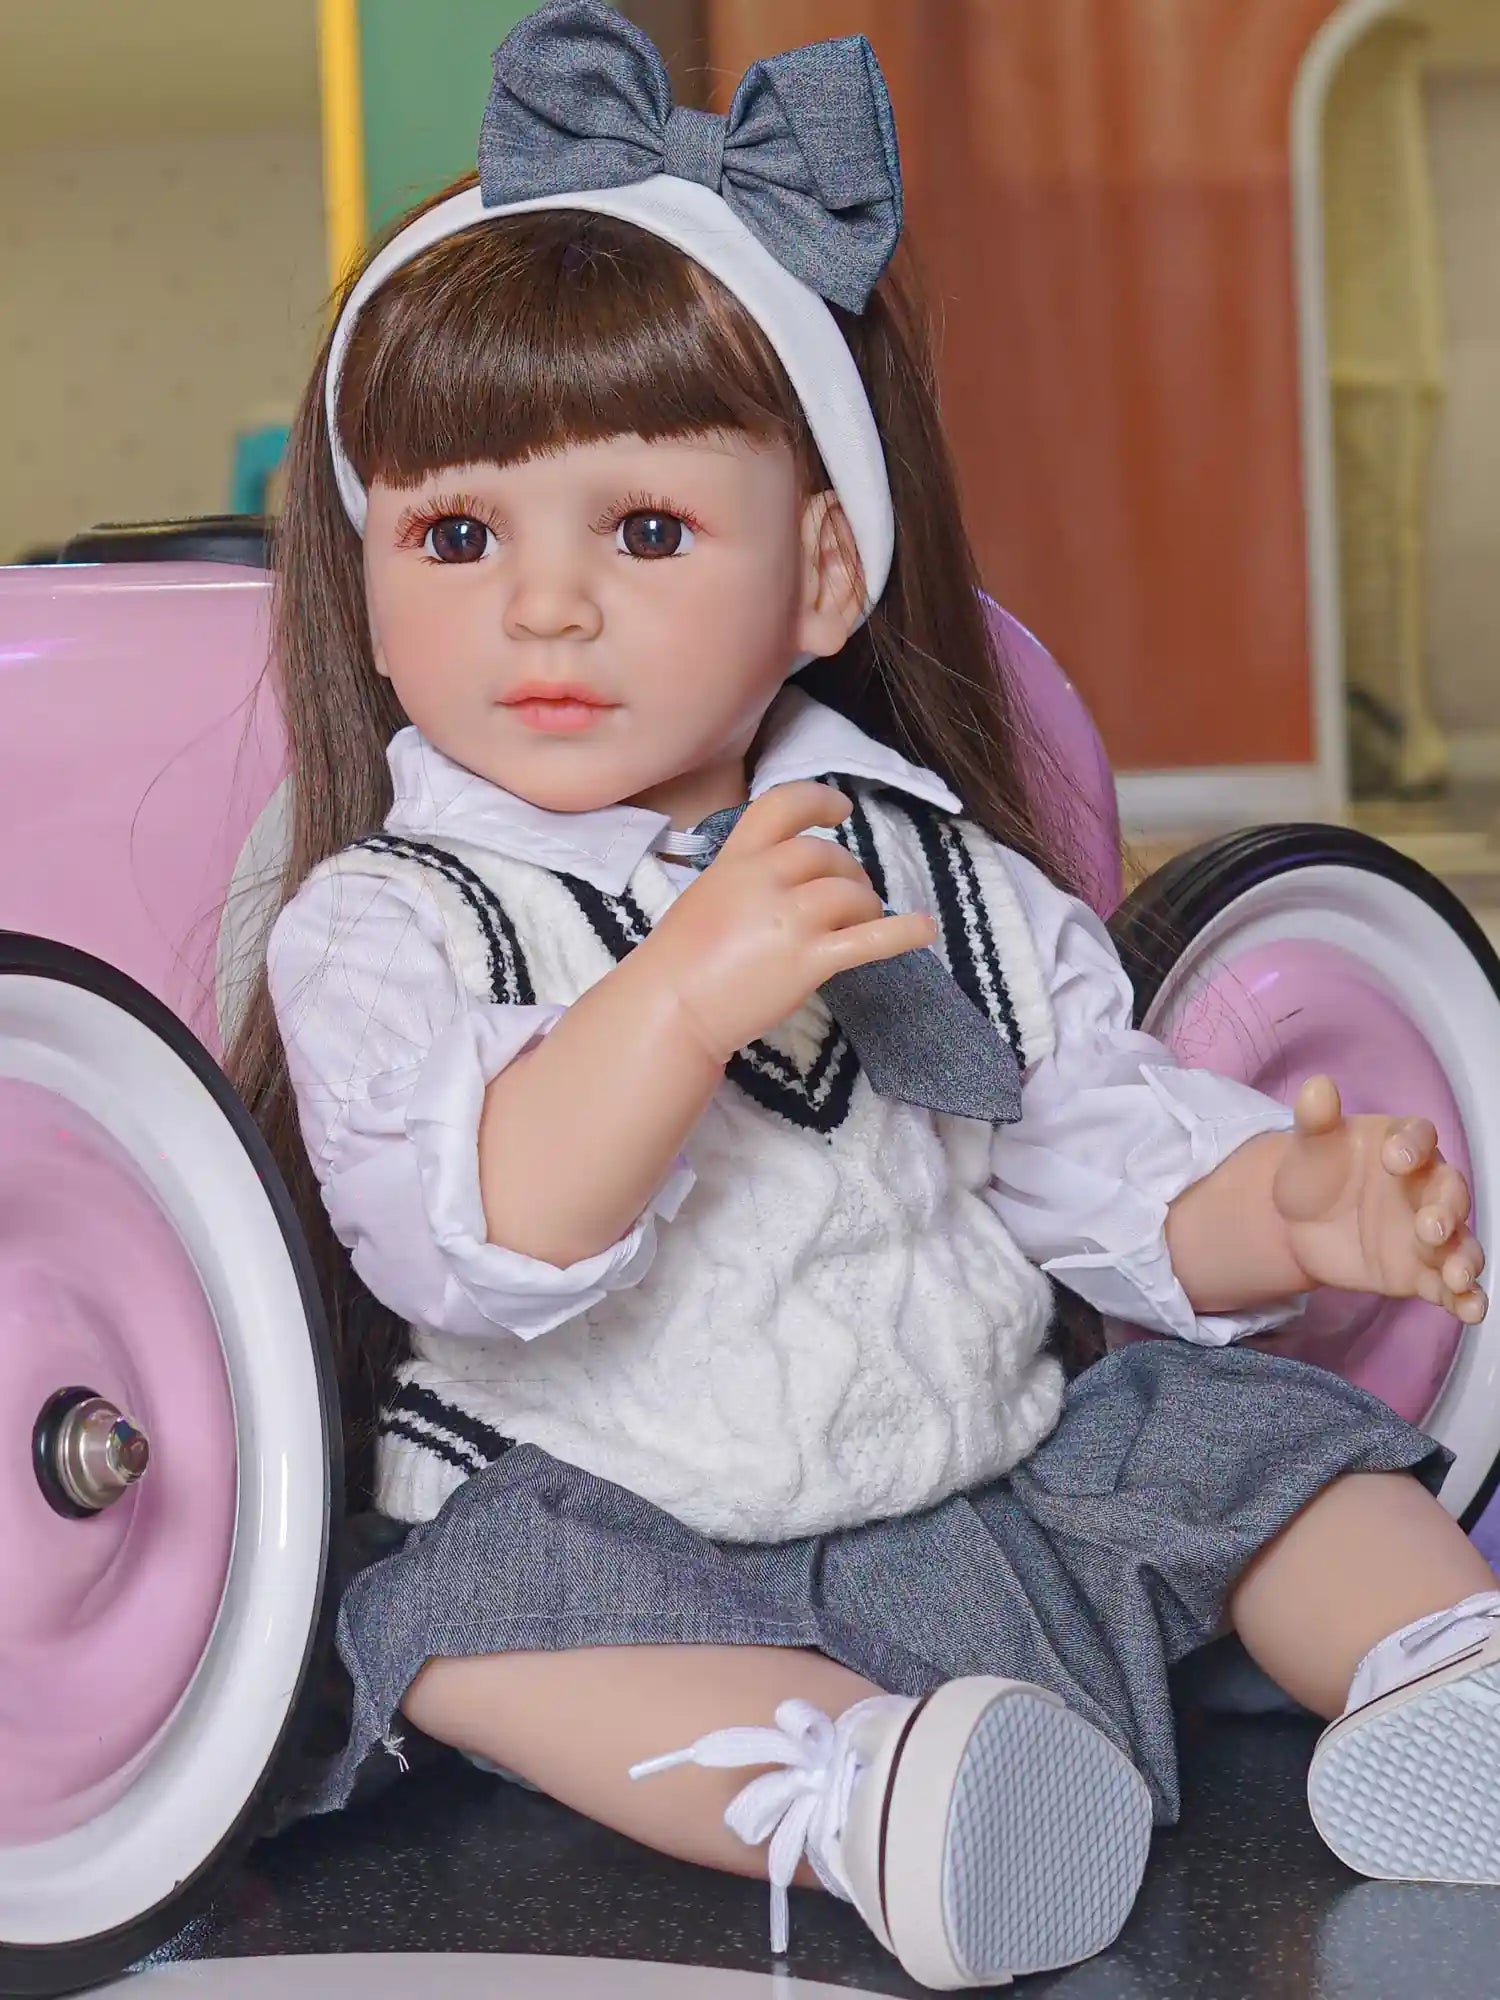 Realistic toddler doll in a seated position, with a dark hair bow and a traditional-looking school uniform, set against the backdrop of a children's play area.